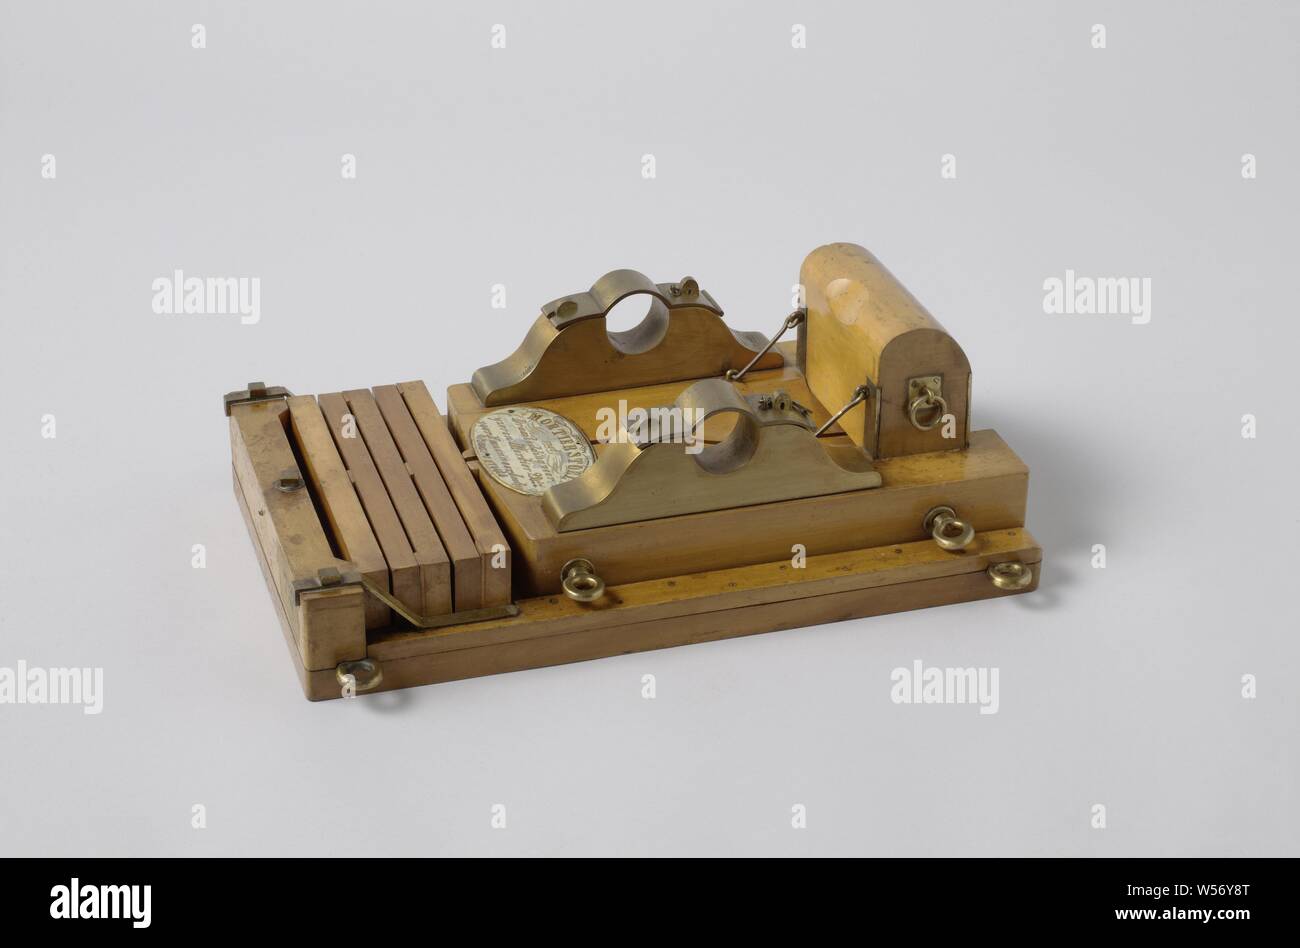 Model of the Bed of a 20-cm Sea Service Mortar on a Pivoting Undercarriage, Model of a mortar chair for mortar of 20 inches (cm) on swivel bed. The swivel bed consists of a flat wooden plate with a hole for the spindle bolt in the middle. At the rear is a fixed buffer beam with five removable beams, which serve as a buffer for absorbing the recoil, small spools are arranged between these beams, alternately at the ends or in the middle, through which the beams can spring. The chair consists of two parts placed in the direction of the layers and has taps made entirely of brass, a trough for Stock Photo